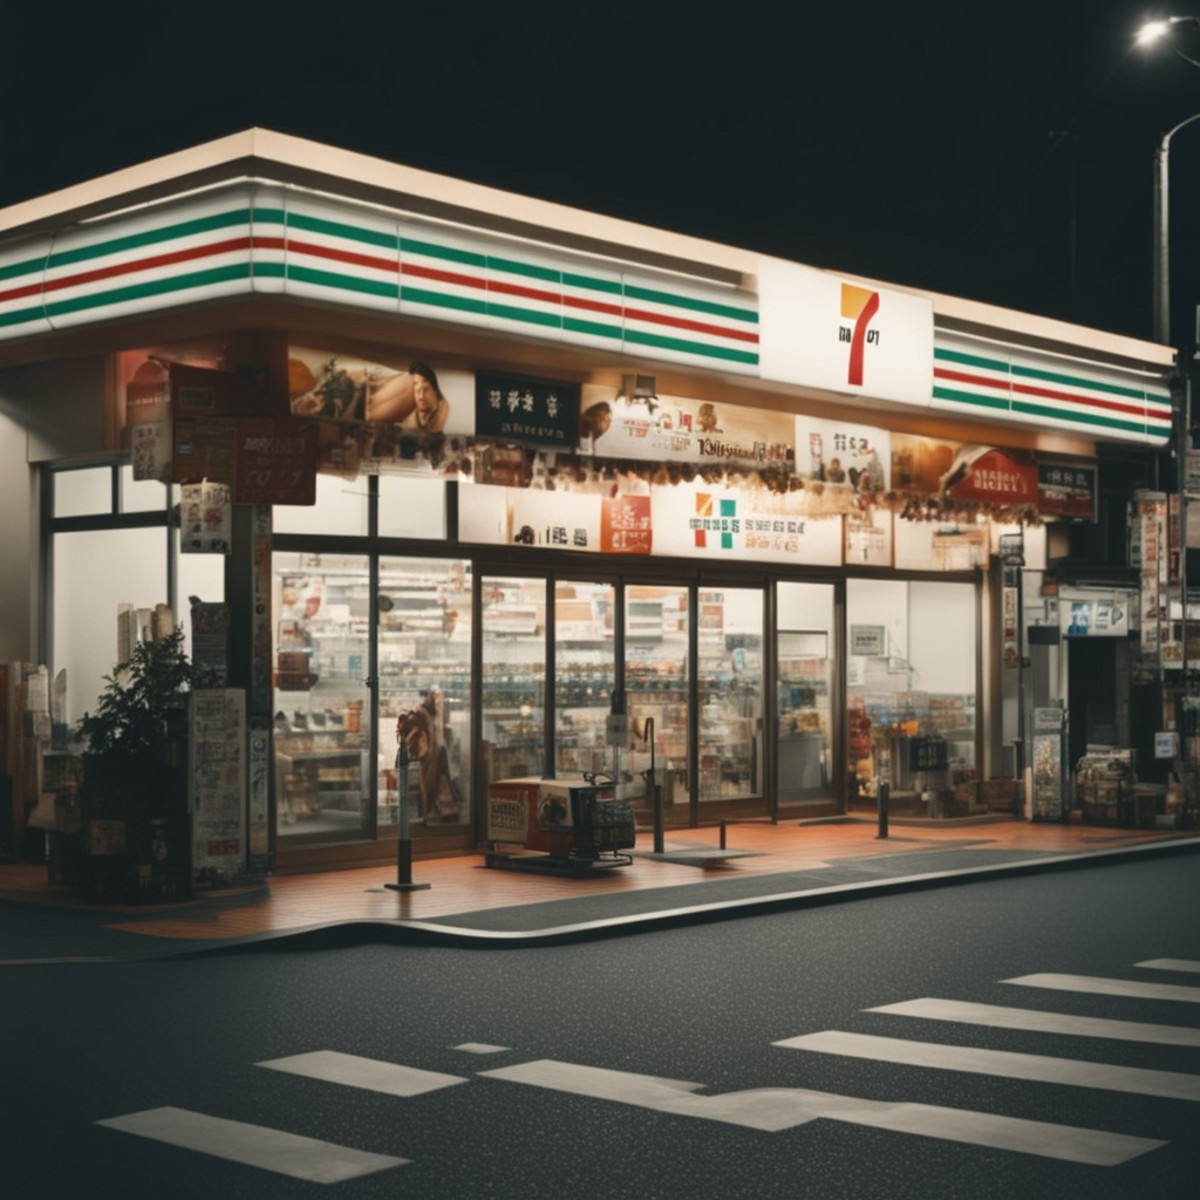 cinematic still best quality, ultra-detailed,
seveneleven, konbini, scenery, storefront, japan, scenery, outdoors, conveni...